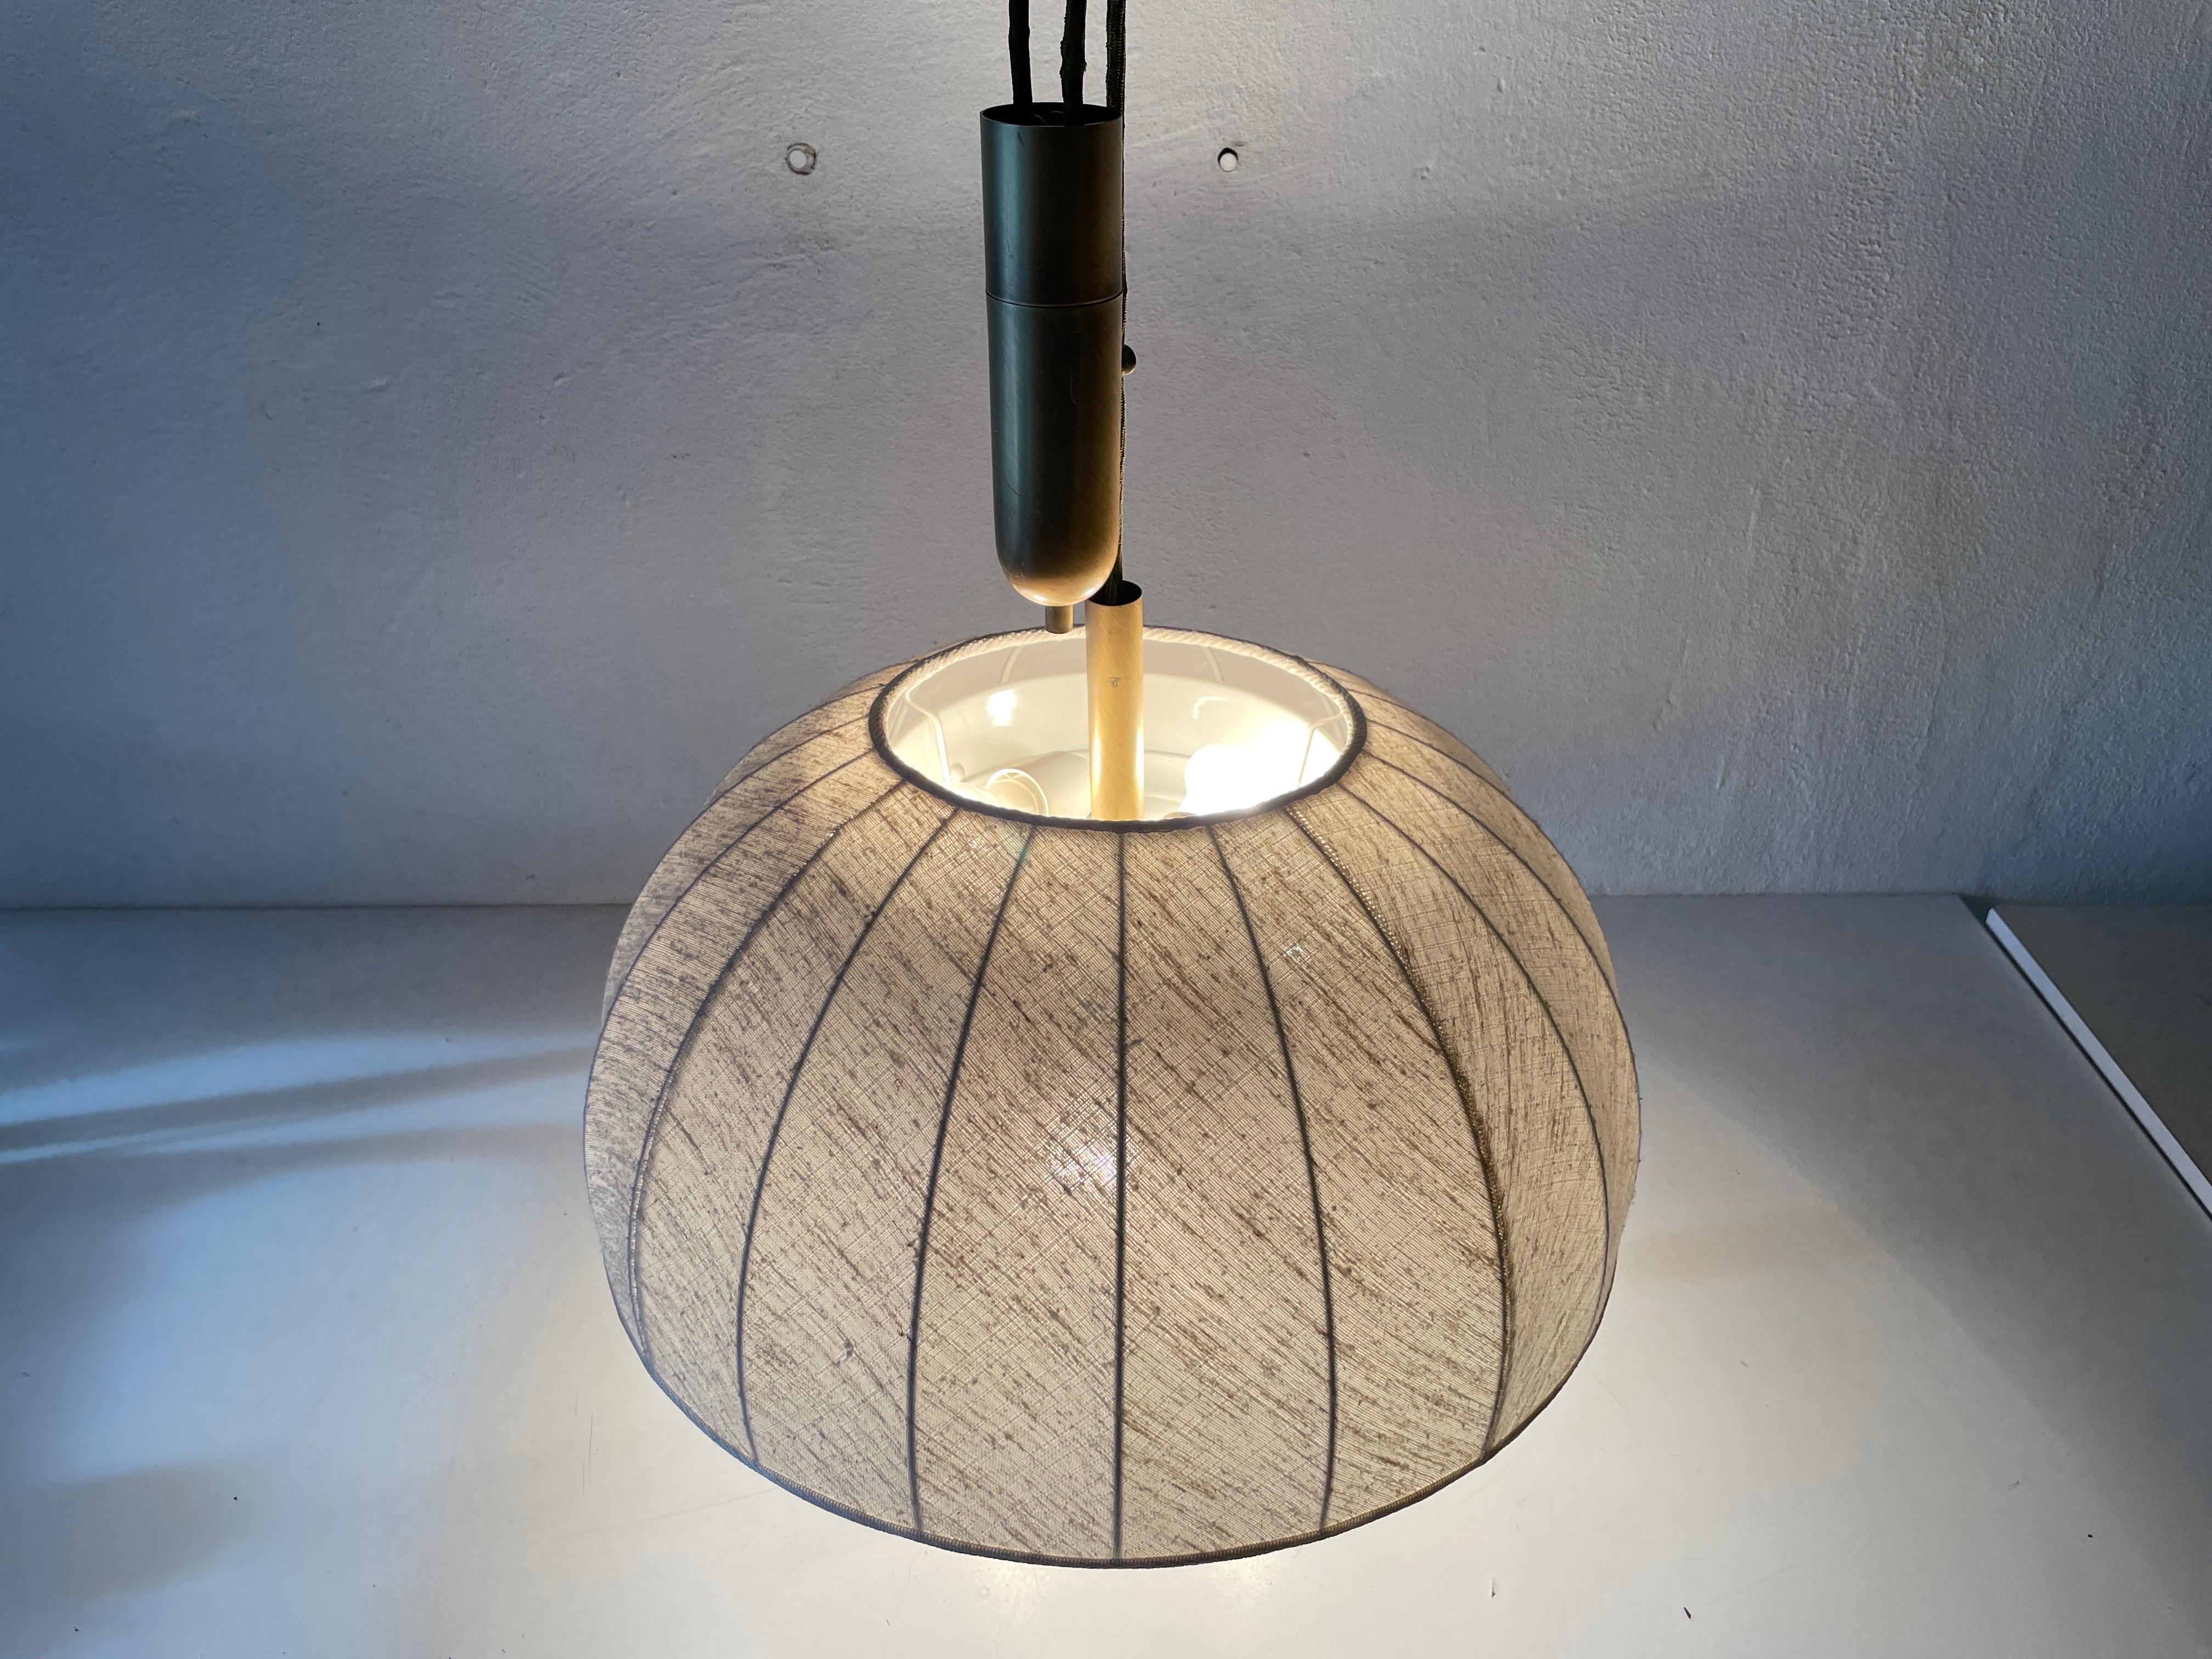 Brass & Fabric Shade Counterweight Pendant Lamp by Wkr, 1970s, Germany 8